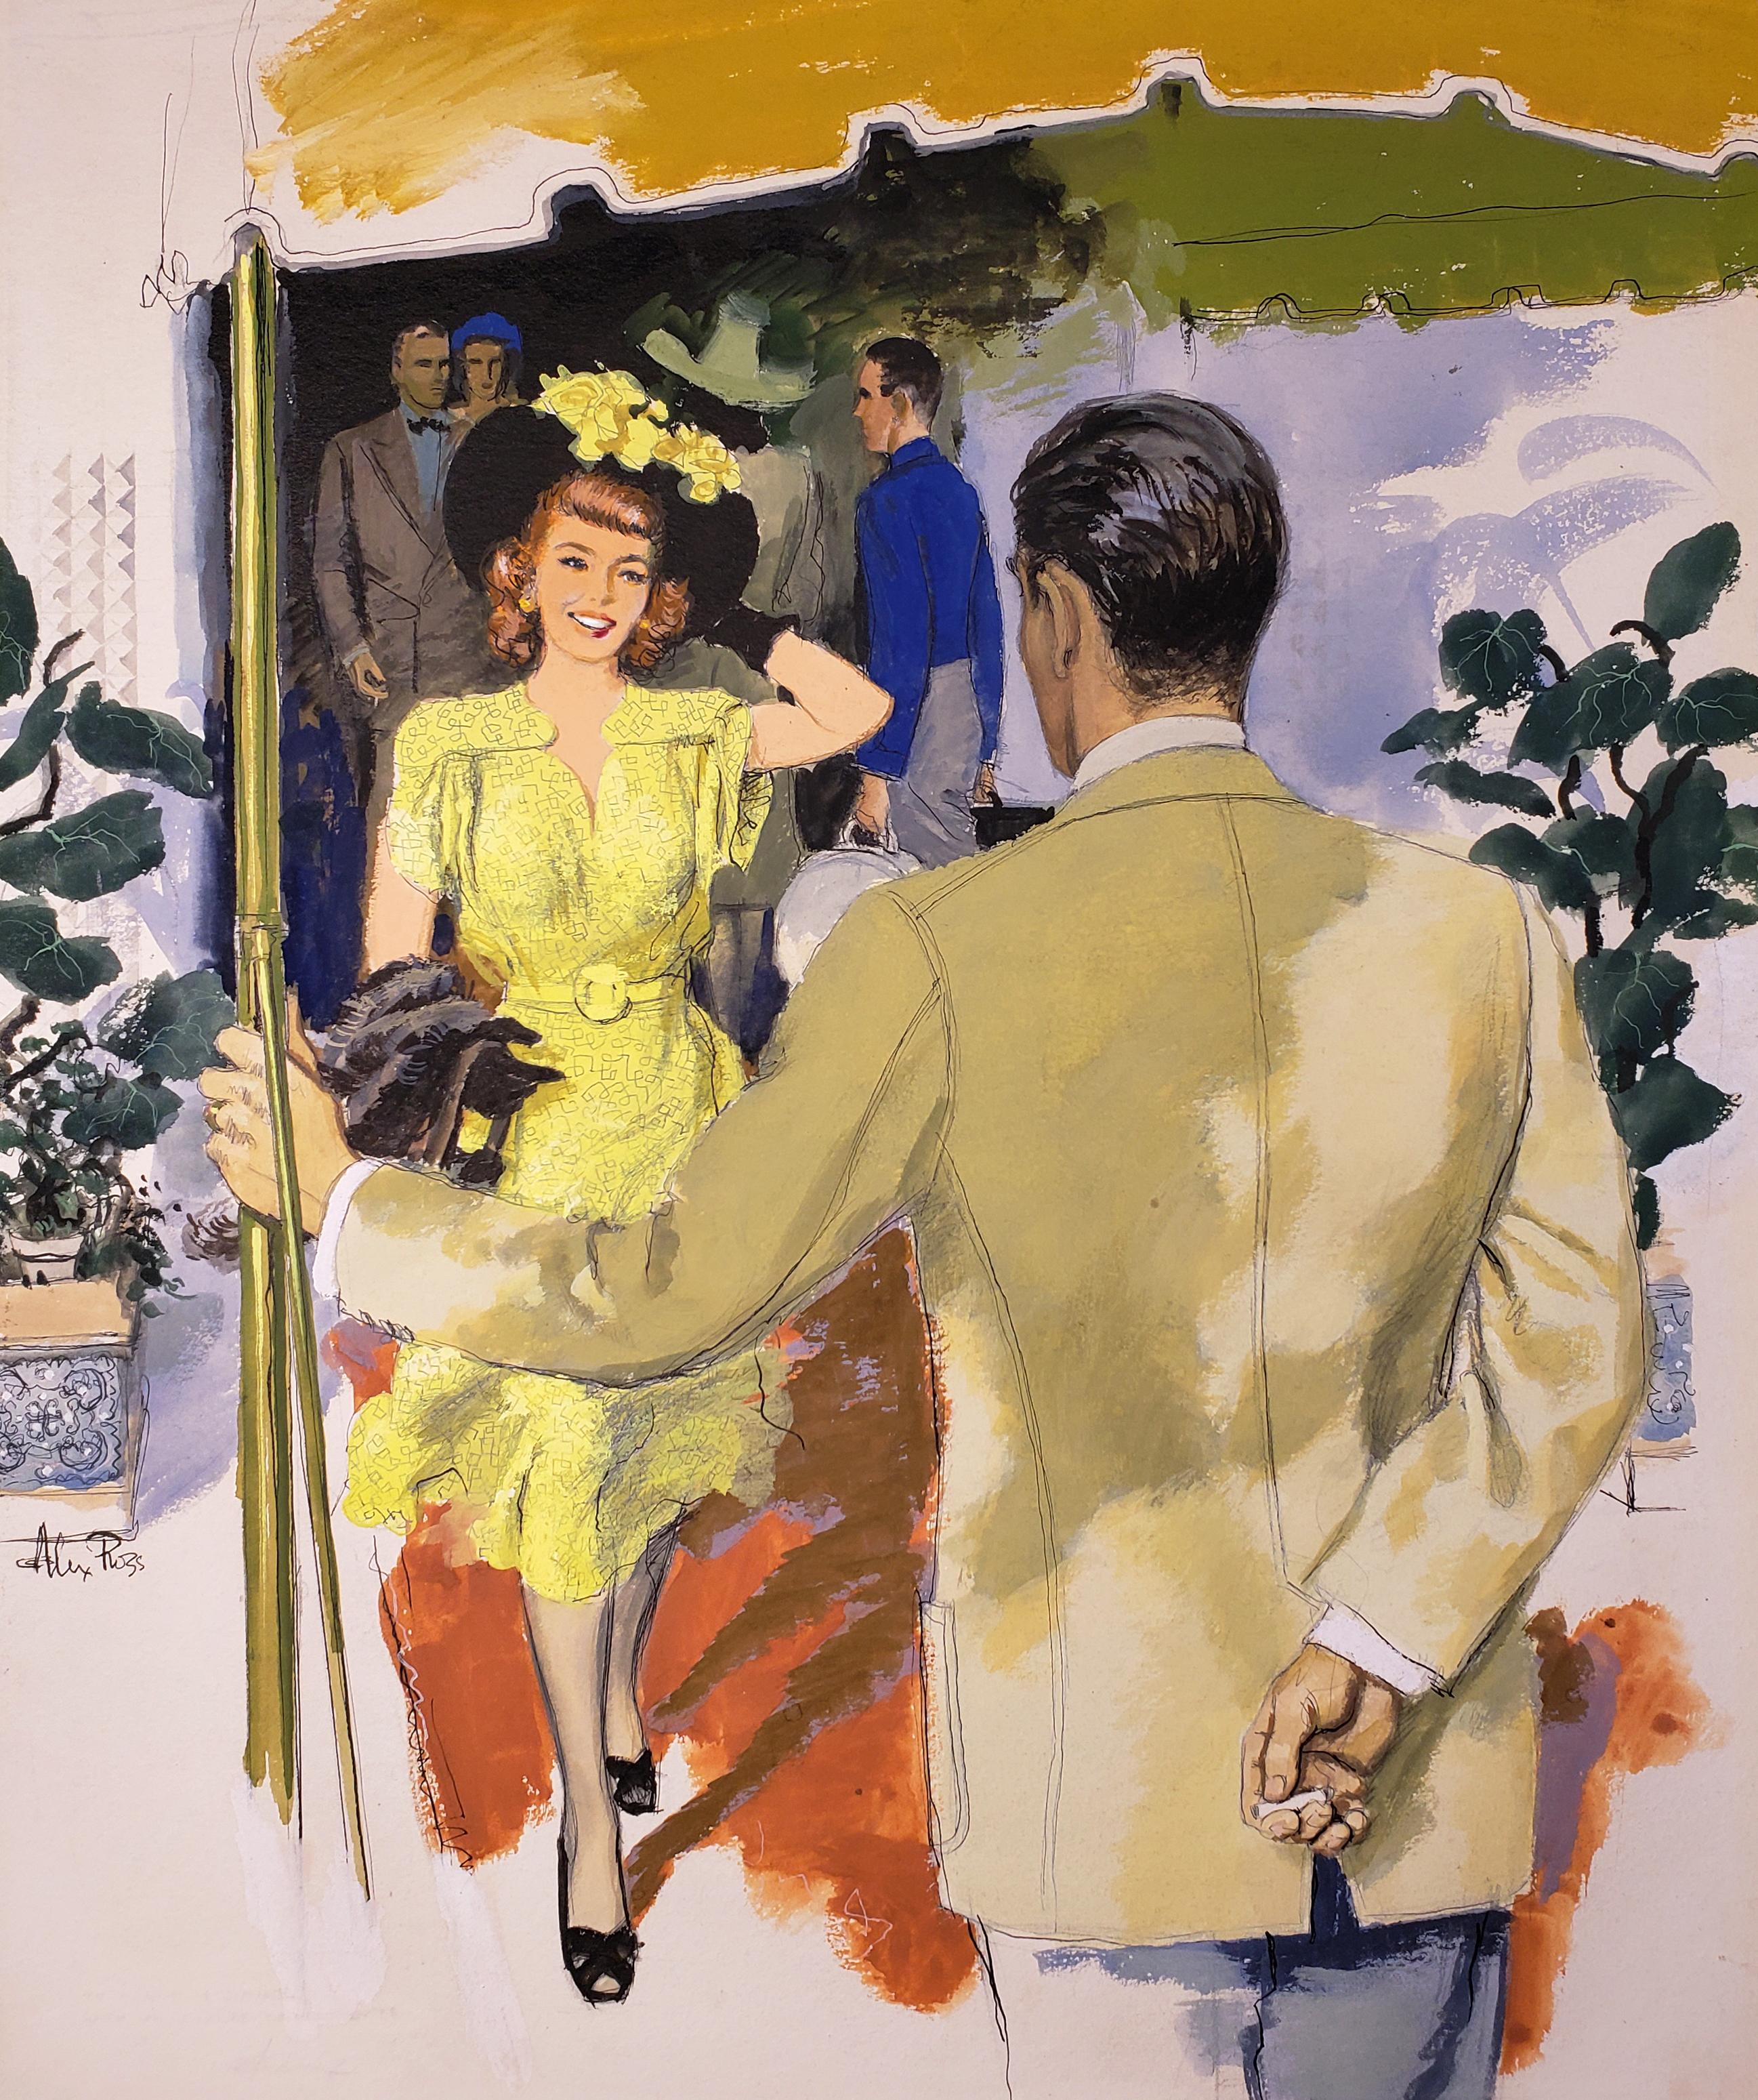 Couples Greeting at Hotel, Illustration for The Saturday Evening Post